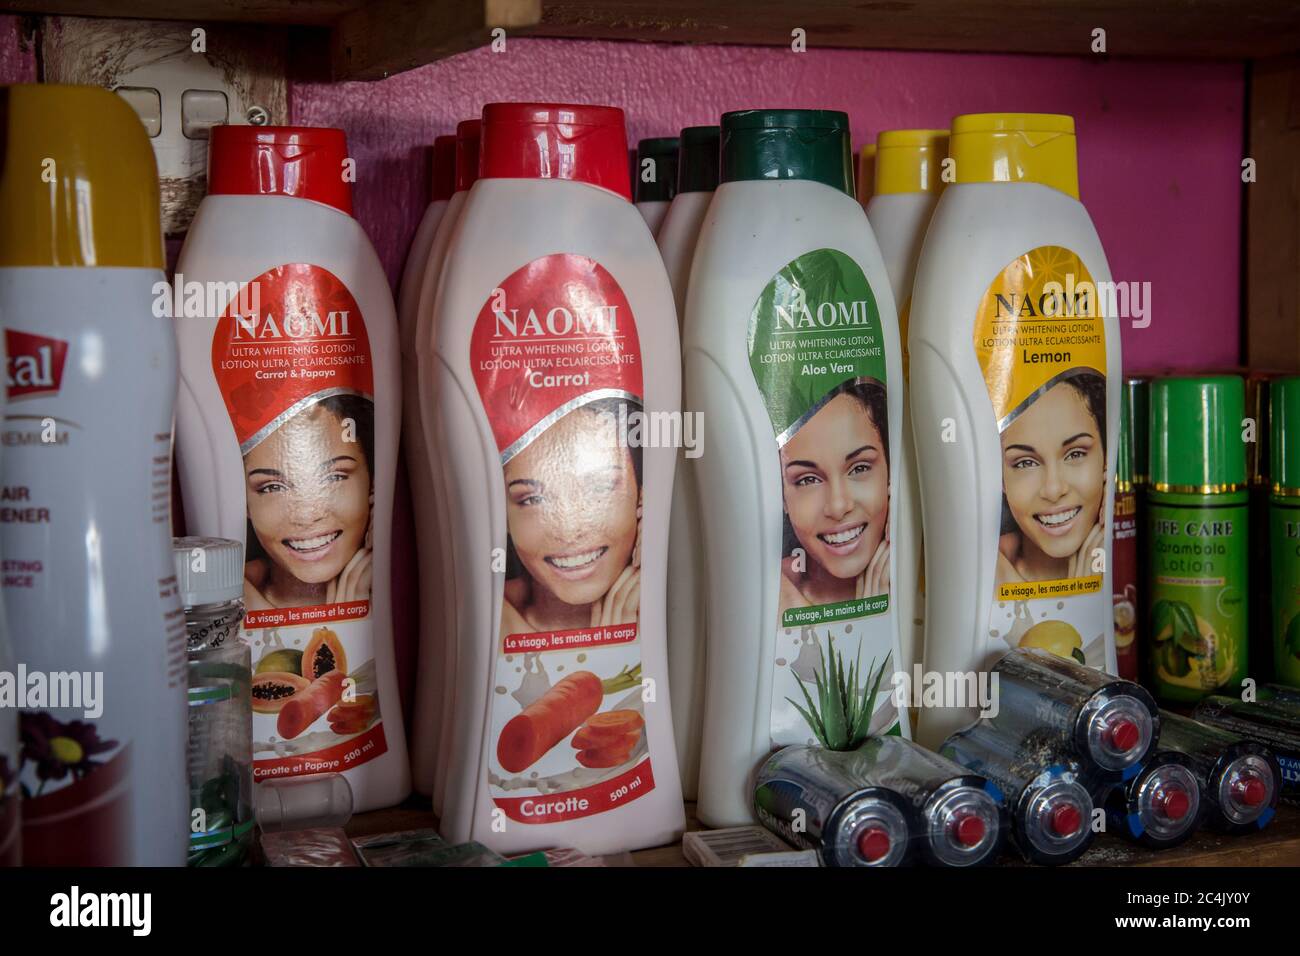 Naomi ultra lightening lotion on sale in a cosmetics shop in Gulu.It is available in carrot, aloe vera, papaya or lemon flavour, and comes from India. It is thought roughly 40 percent of African women bleach their skin. Stock Photo